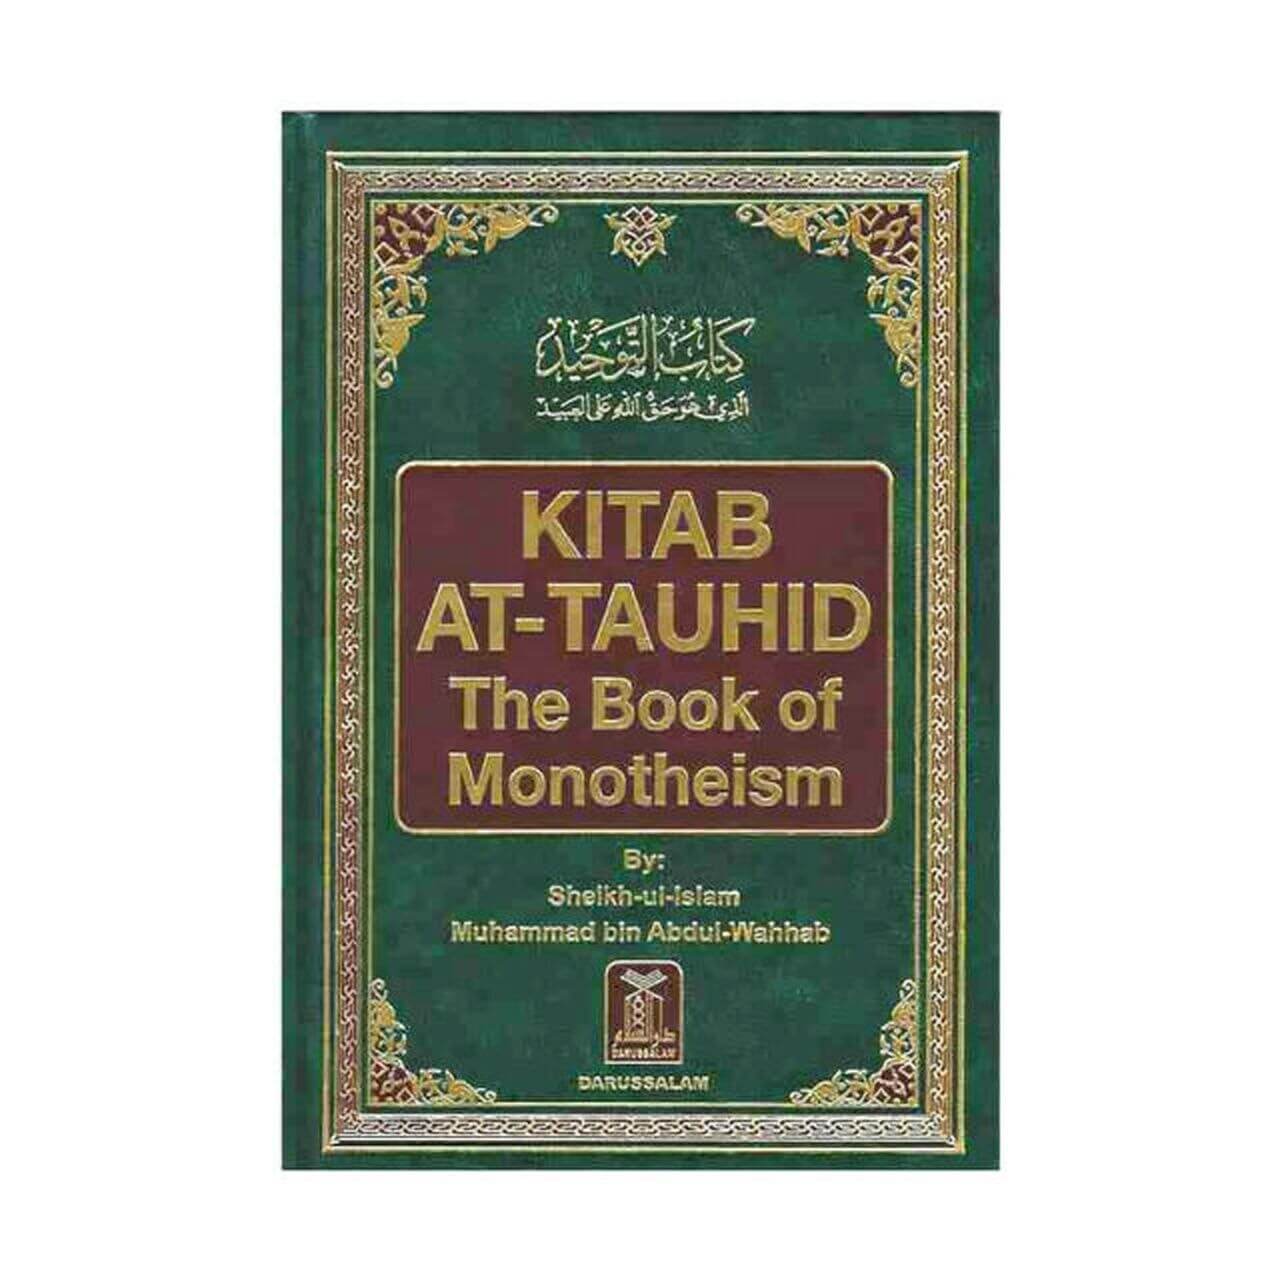 Kitab at tawheed -the book of monotheism Darussalam